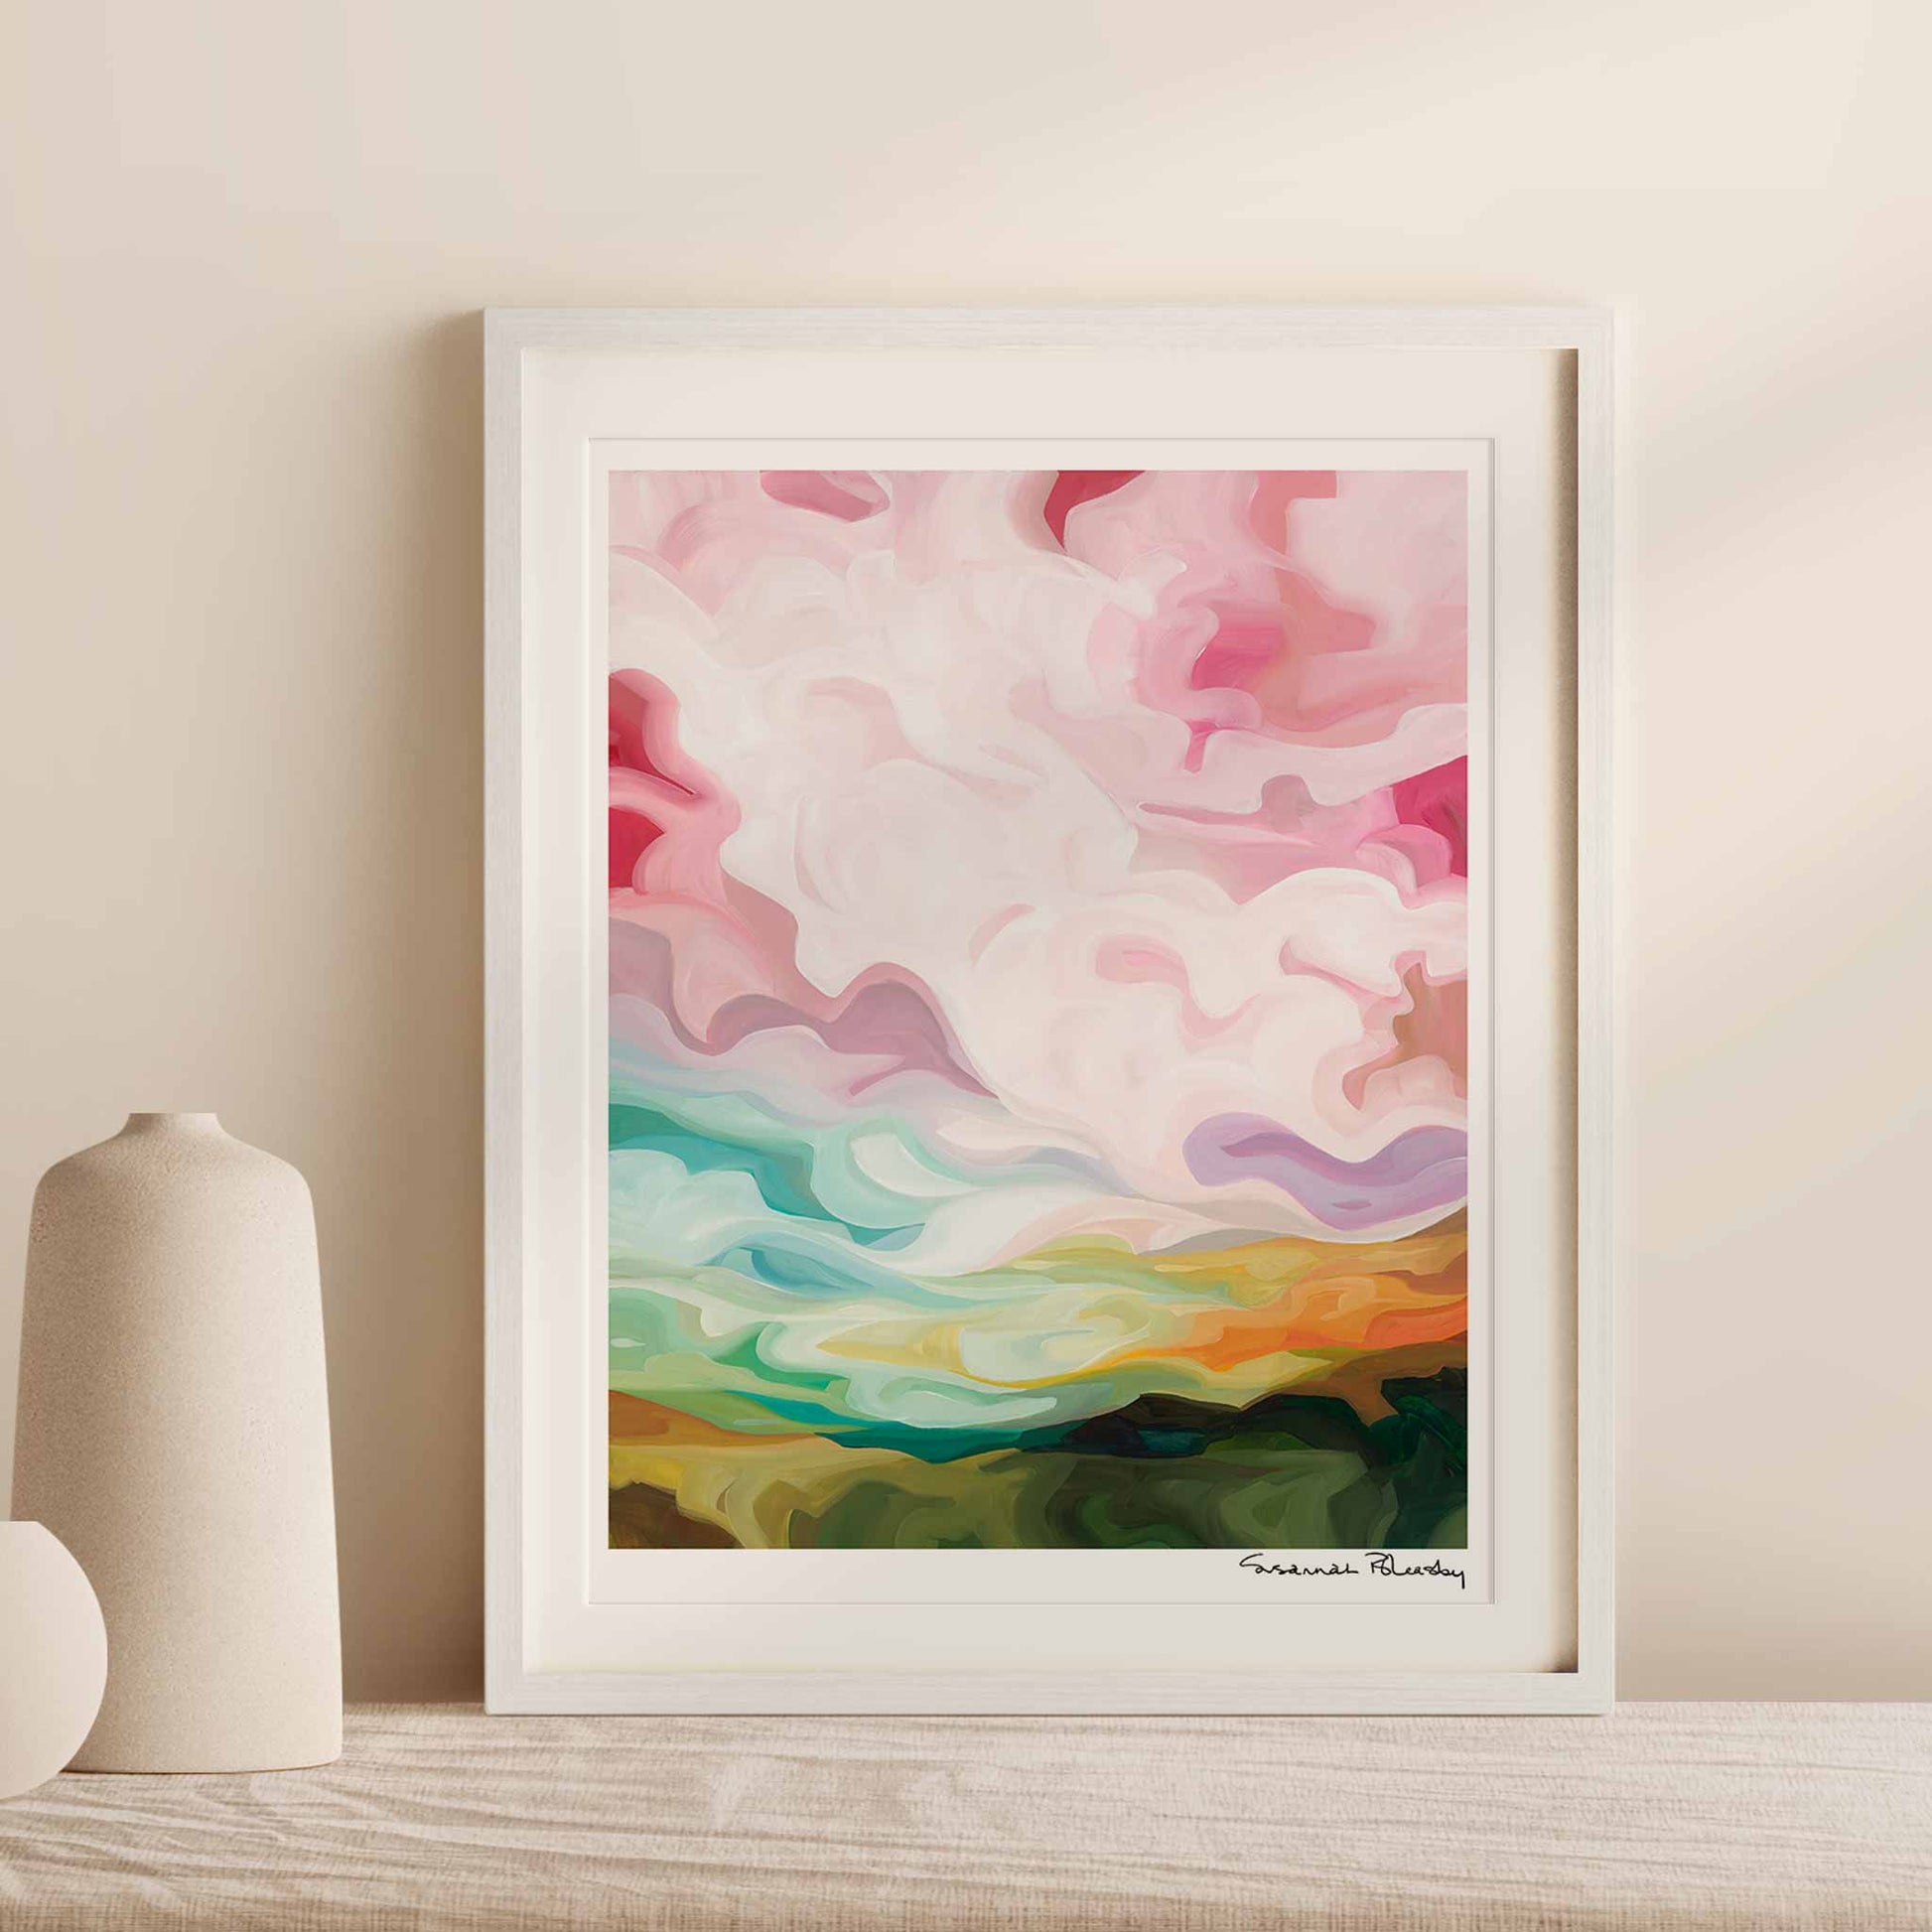 16x20 vertical art print of a pastel colored acrylic sky painting